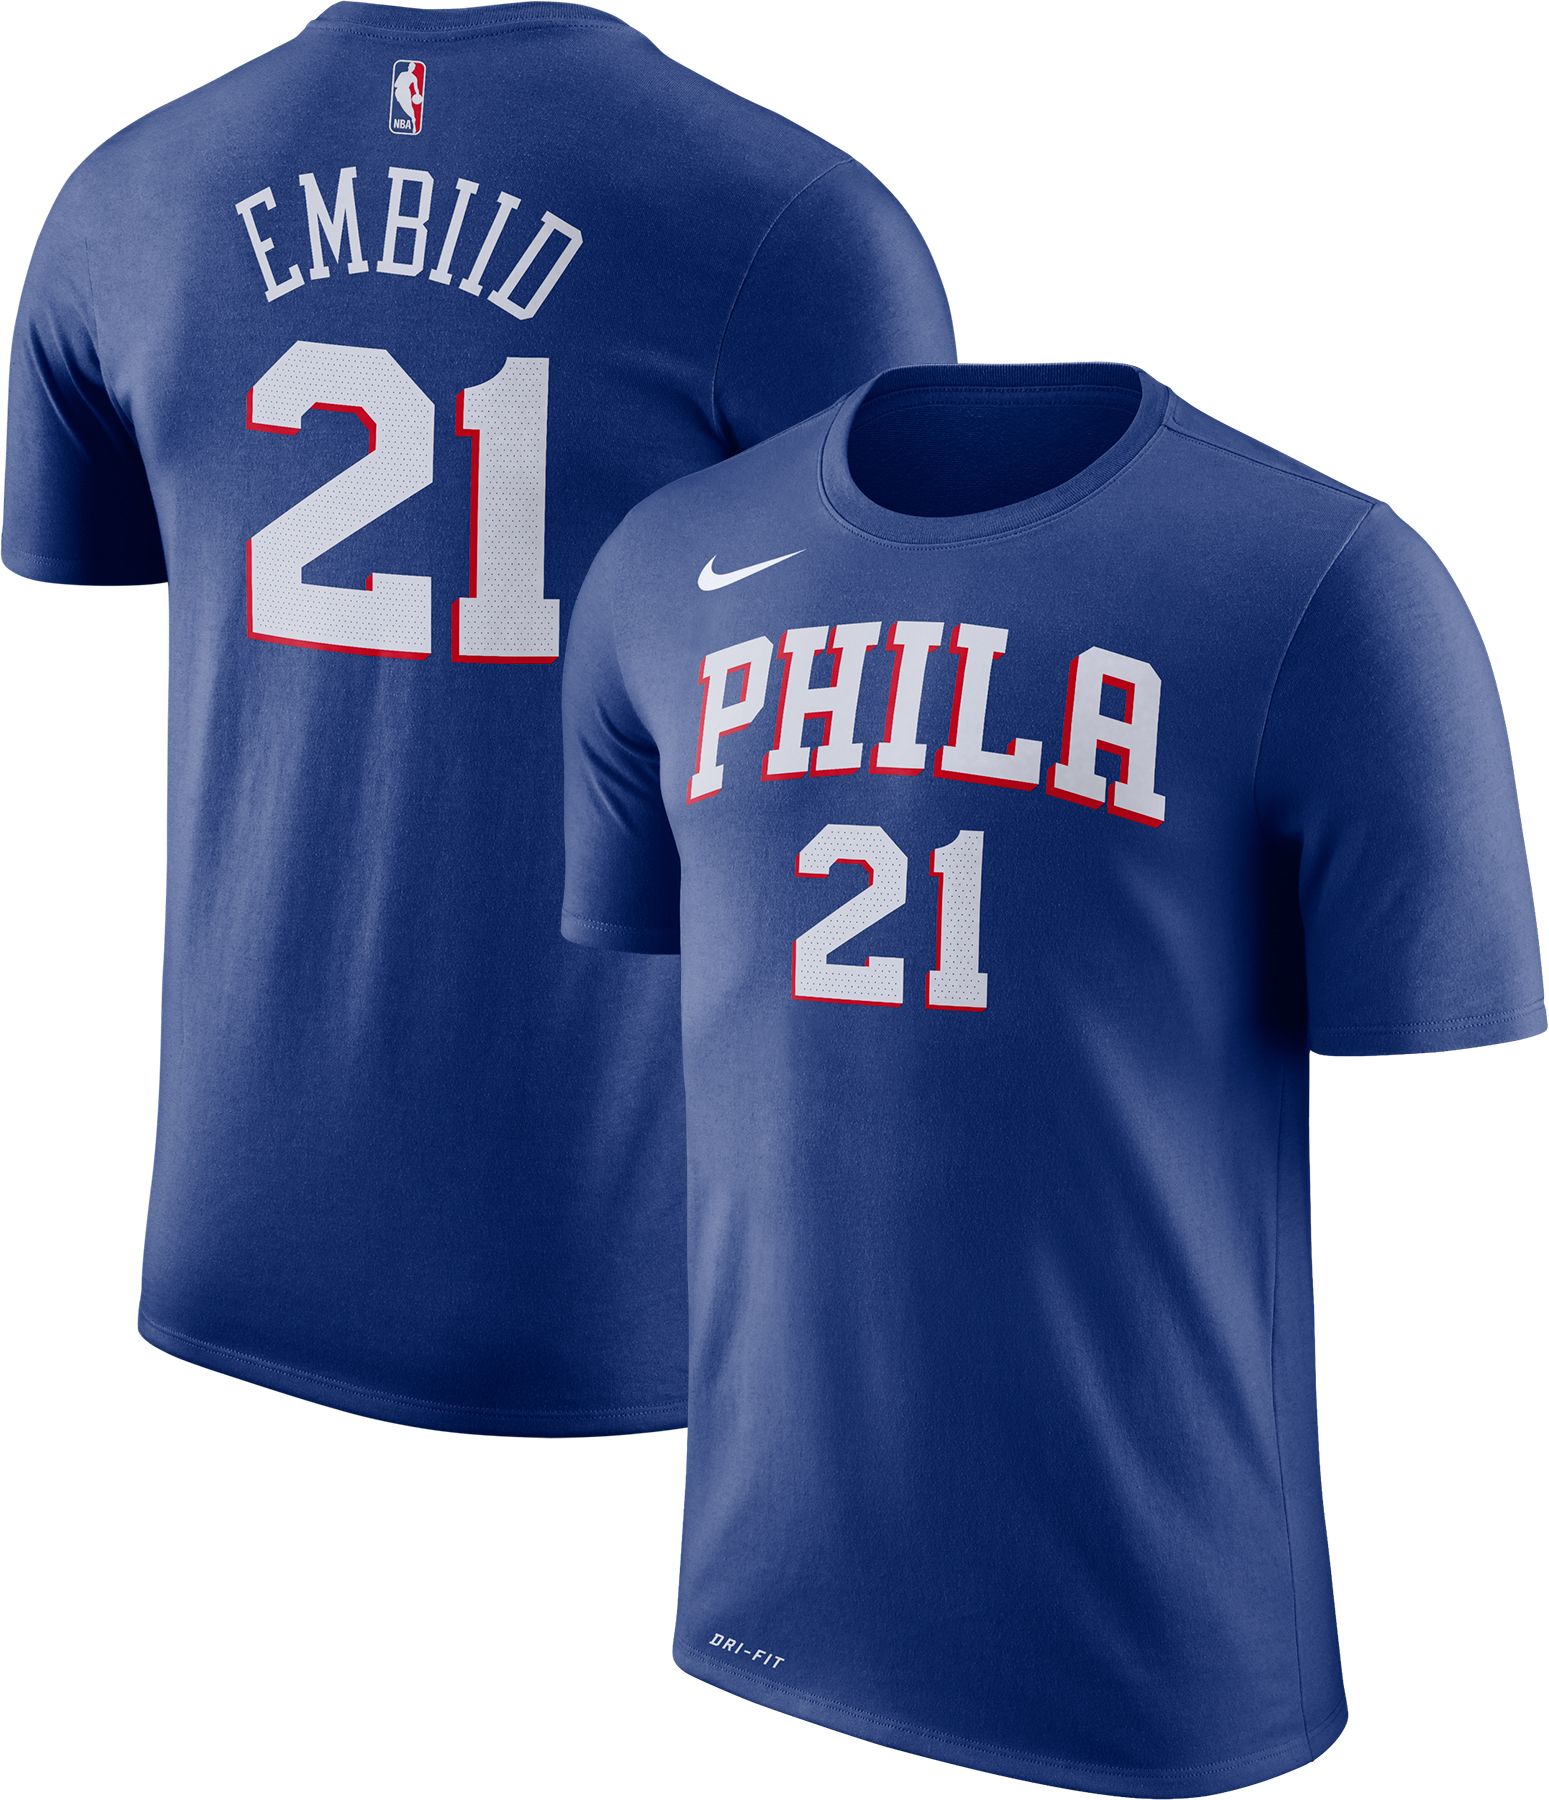 sixers t shirt jersey